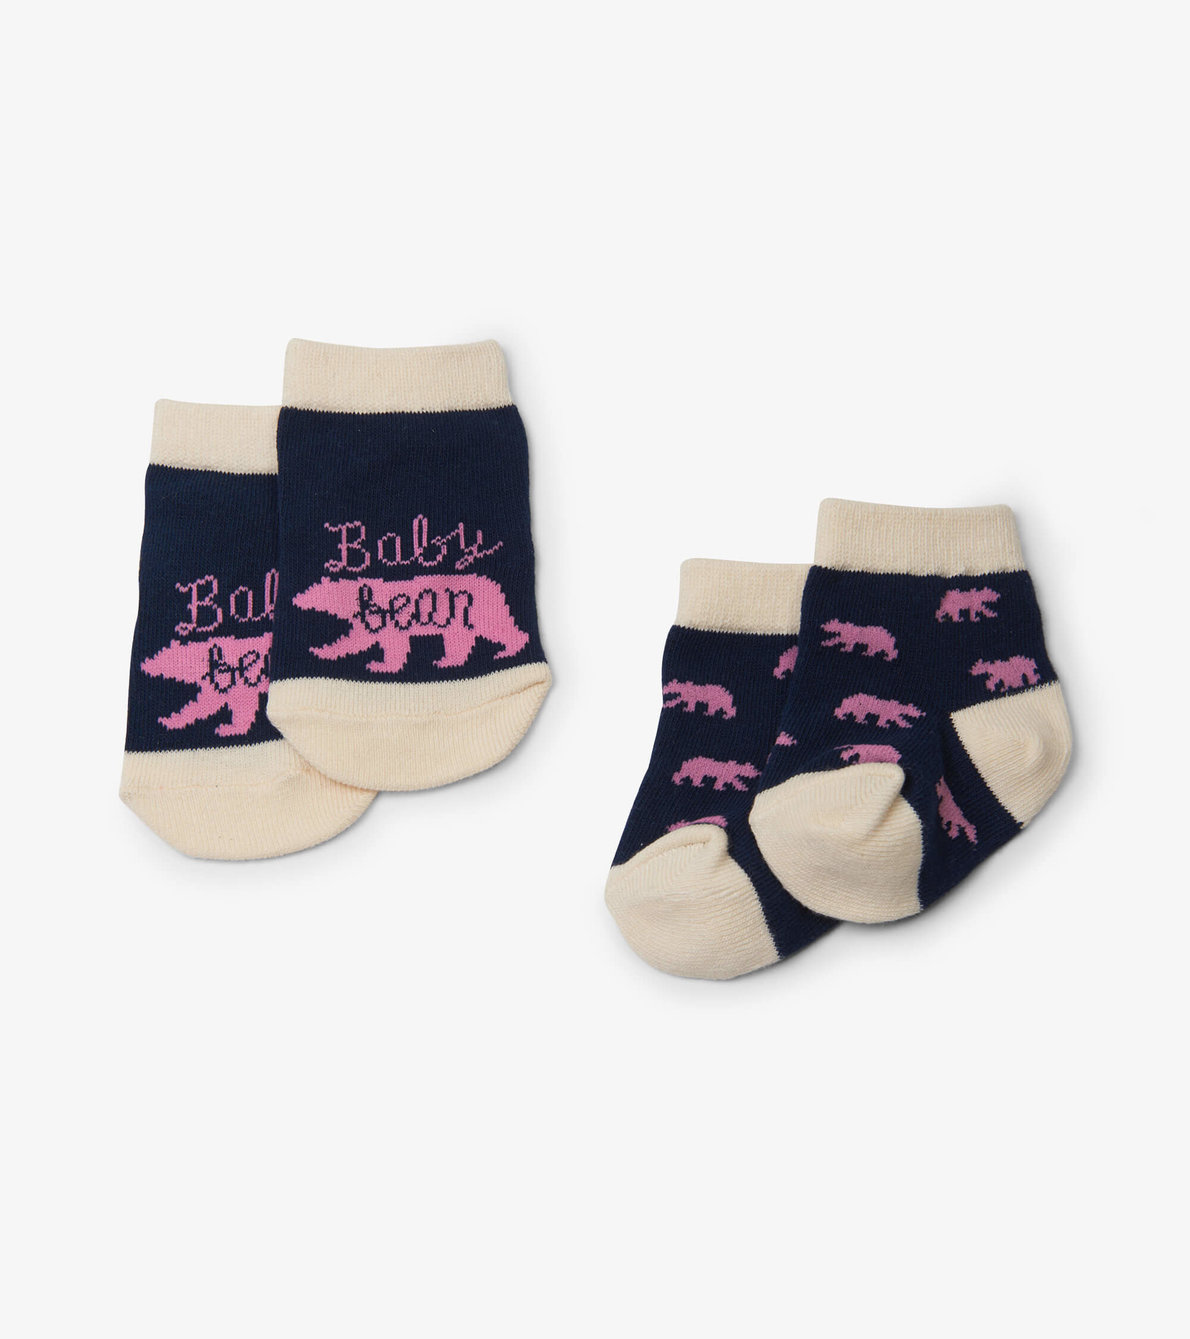 View larger image of Baby Bear Pink 2-Pack Baby Socks